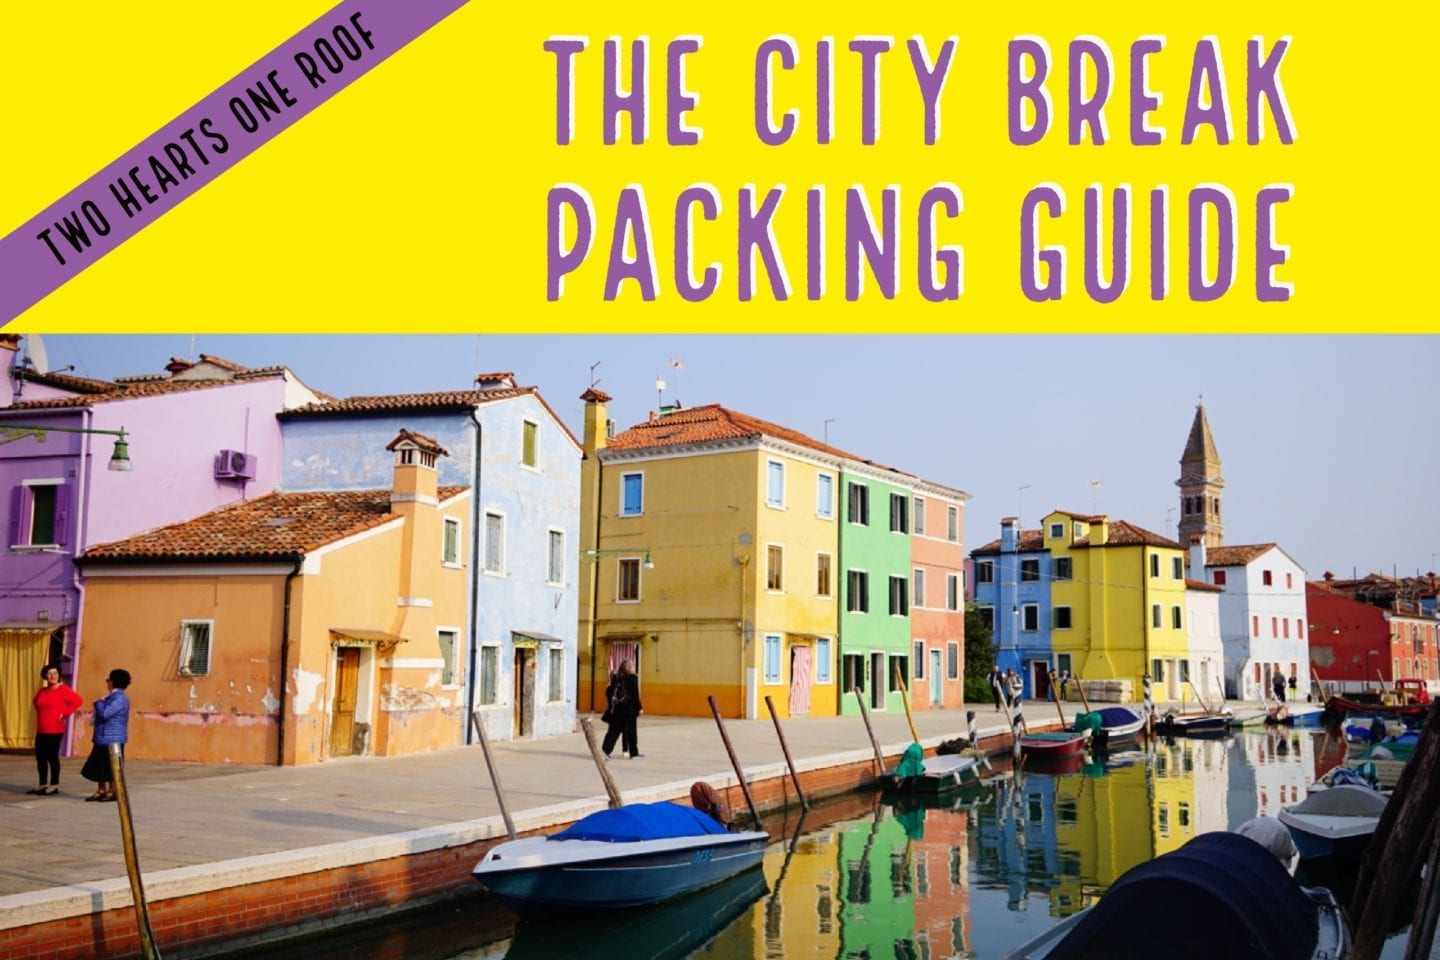 The City Break Packing Guide – Your Mini-Break Packing Essentials